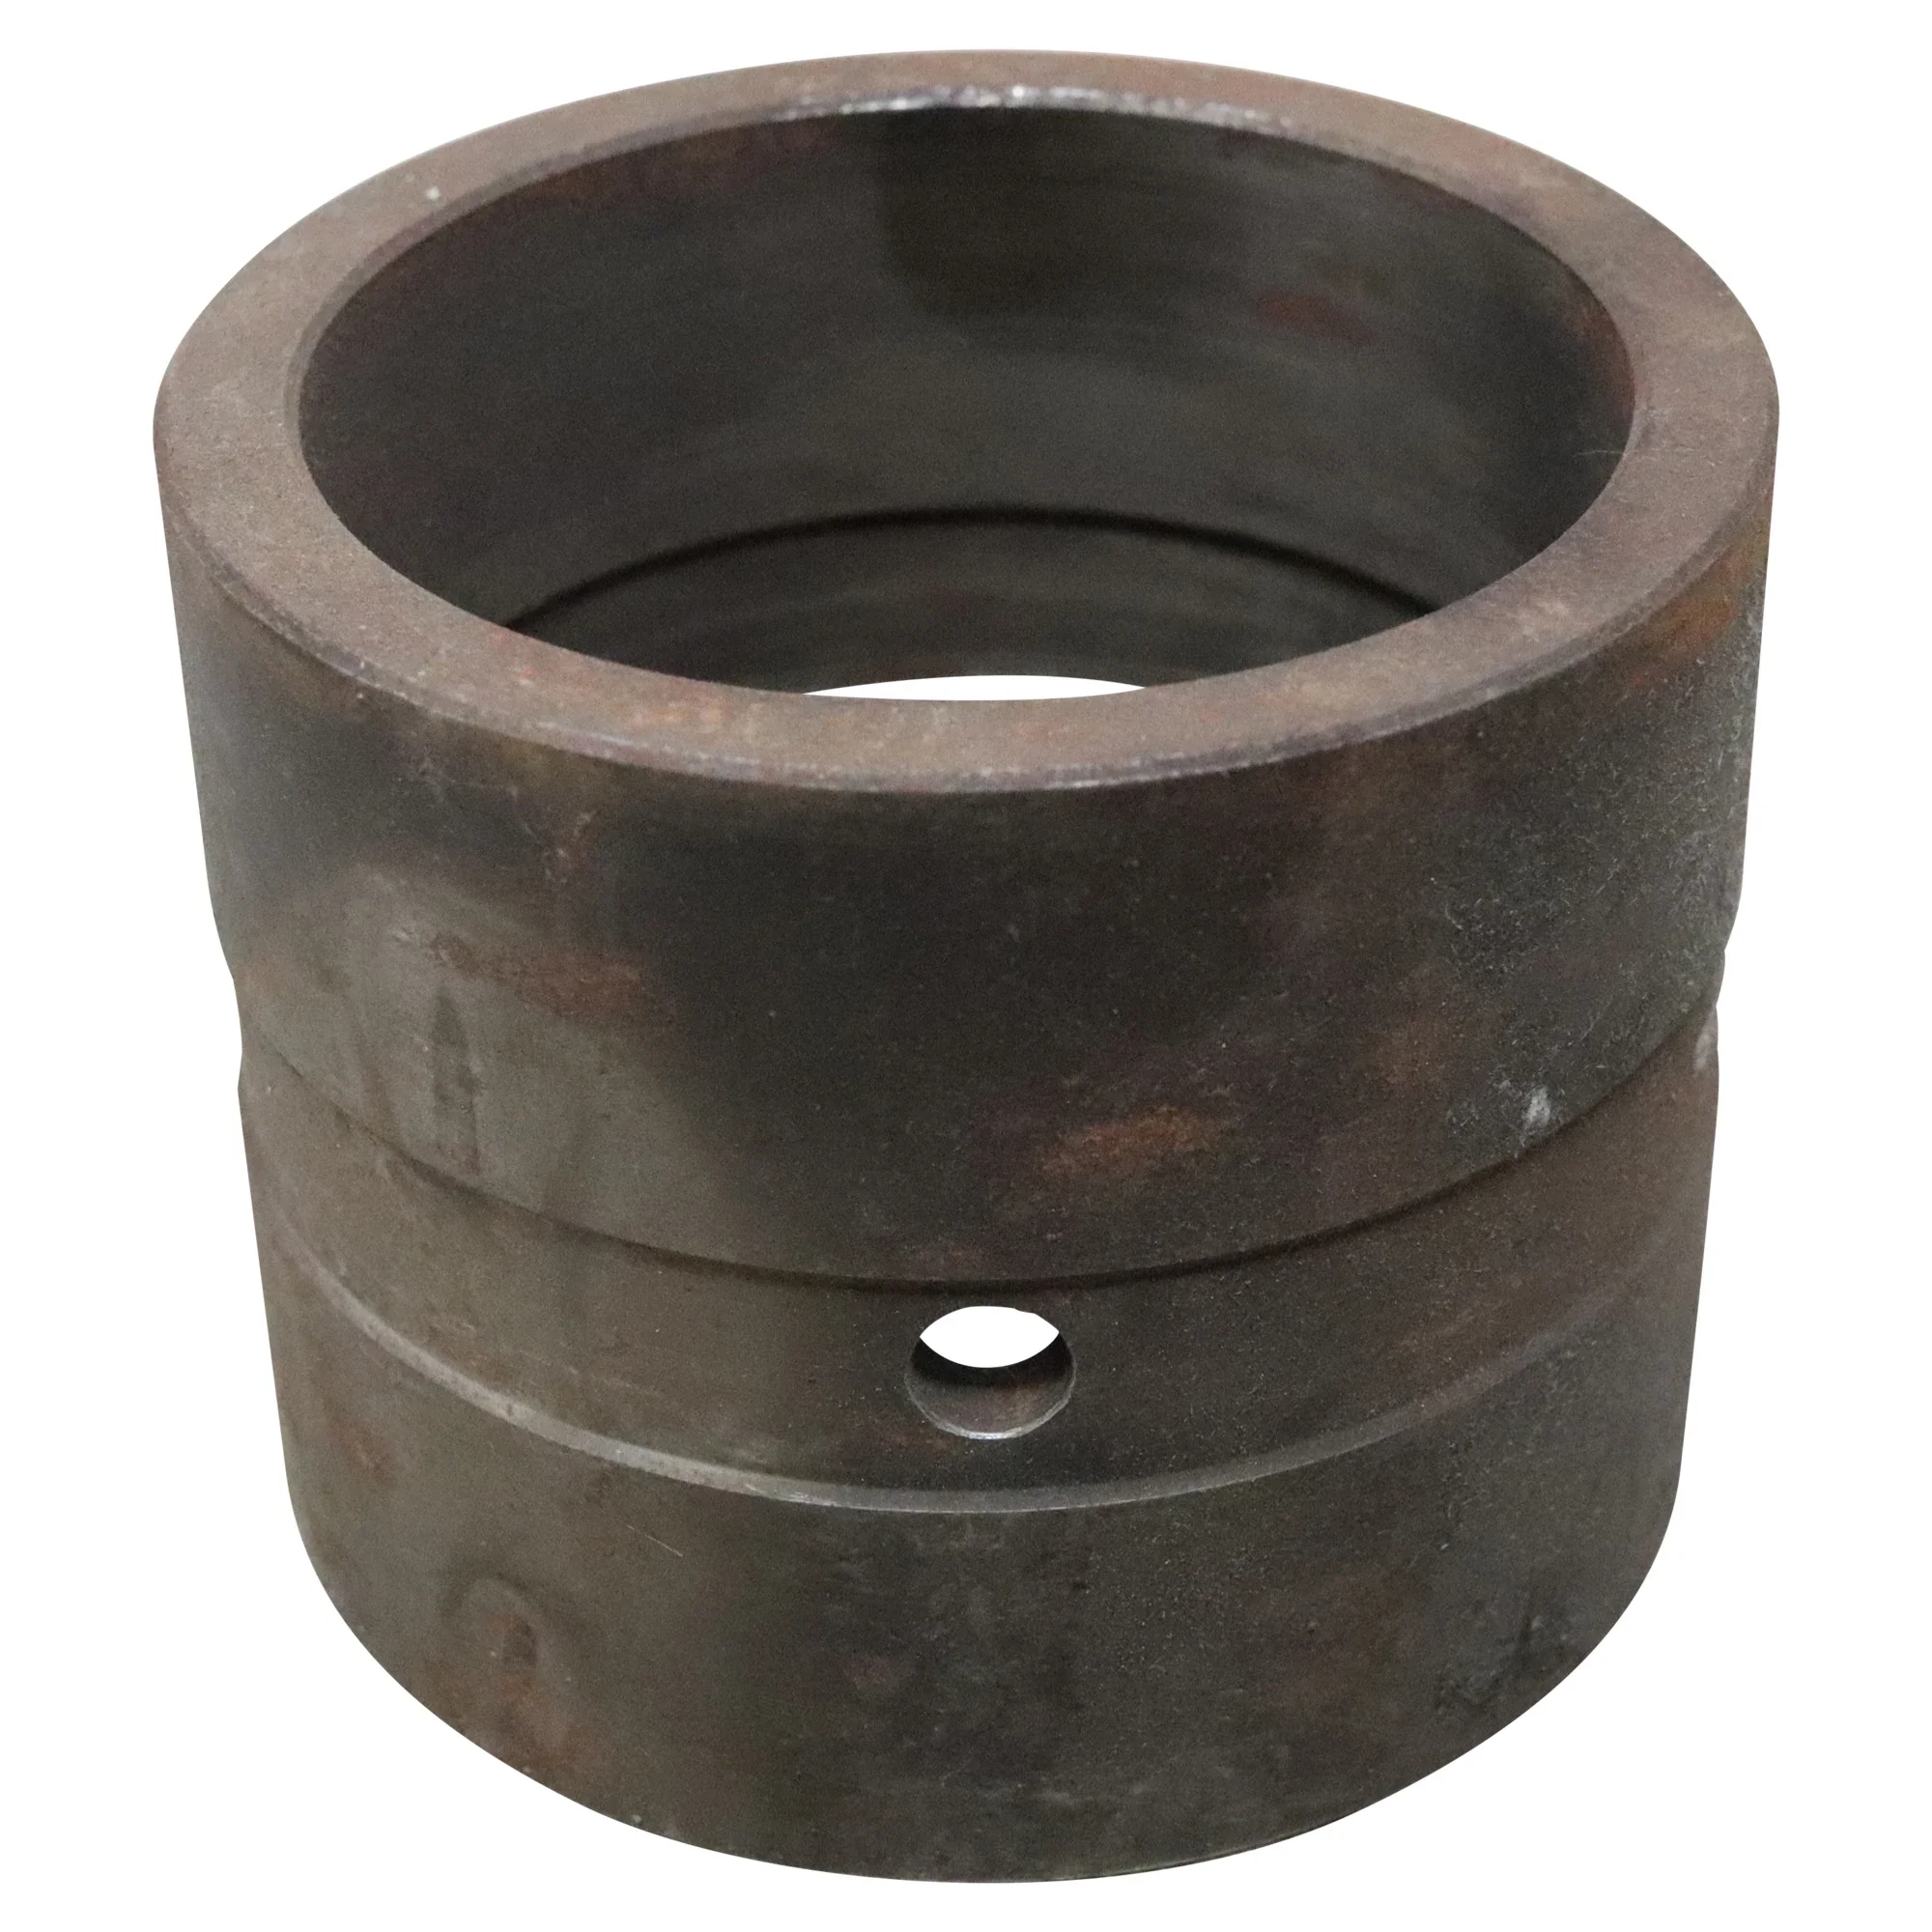 Wastebuilt® Replacement for Heil Bearing Sweep Pivot